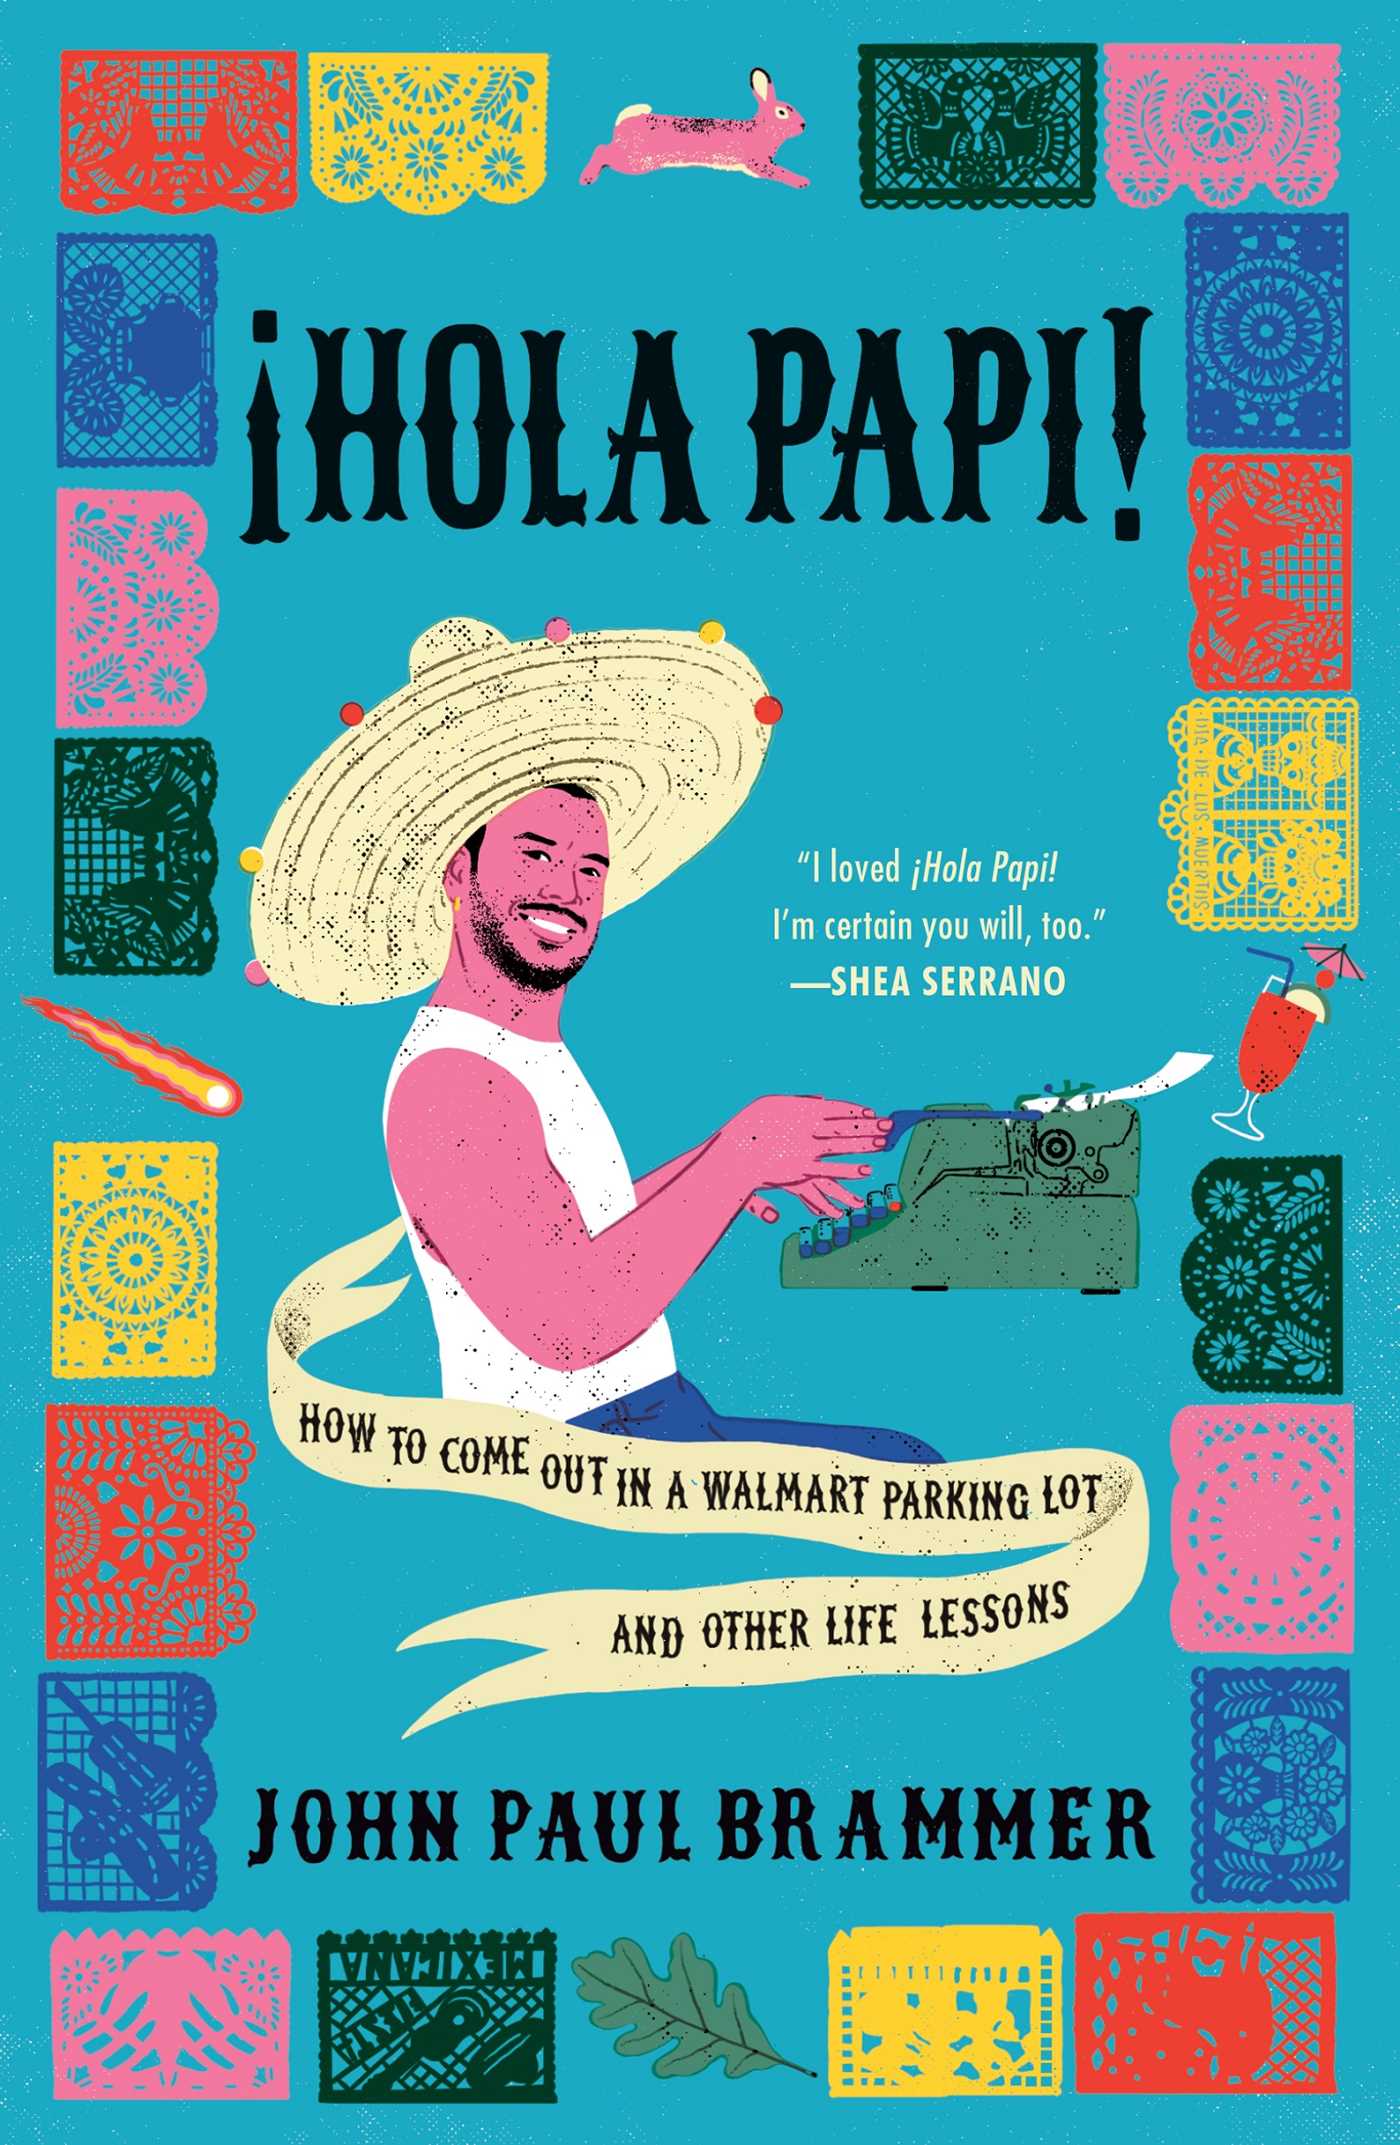 [EPUB] ¡Hola Papi!: How to Come Out in a Walmart Parking Lot and Other Life Lessons by John Paul Brammer